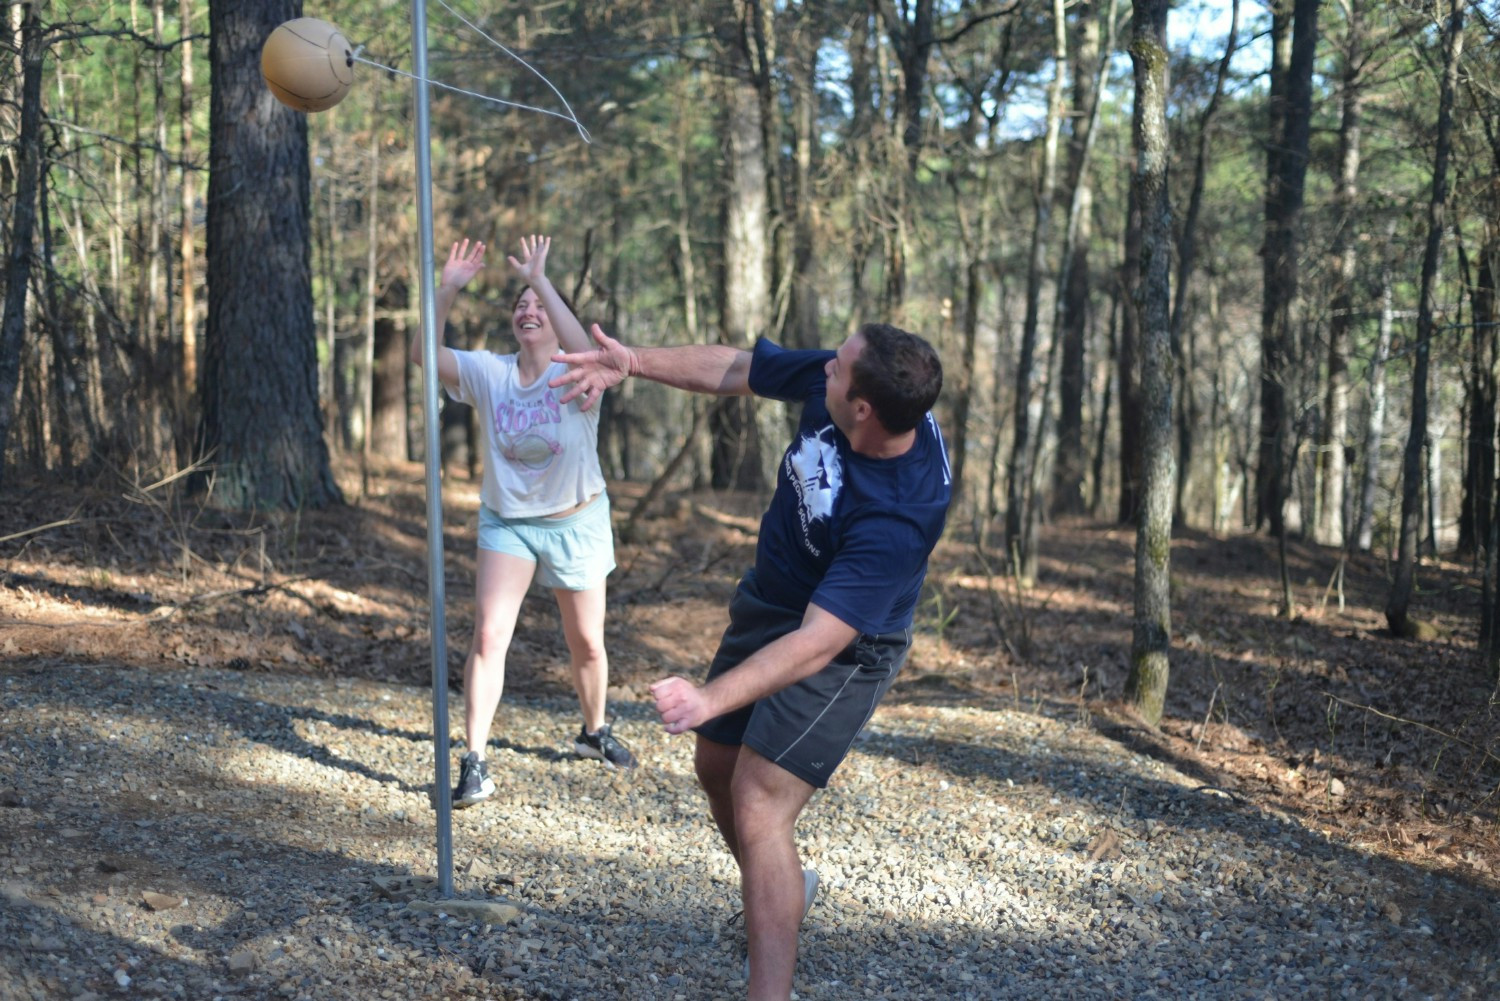 All work and no play? Not here! A friendly game of tetherball broke out during our company retreat to Broken Bow, OK. 